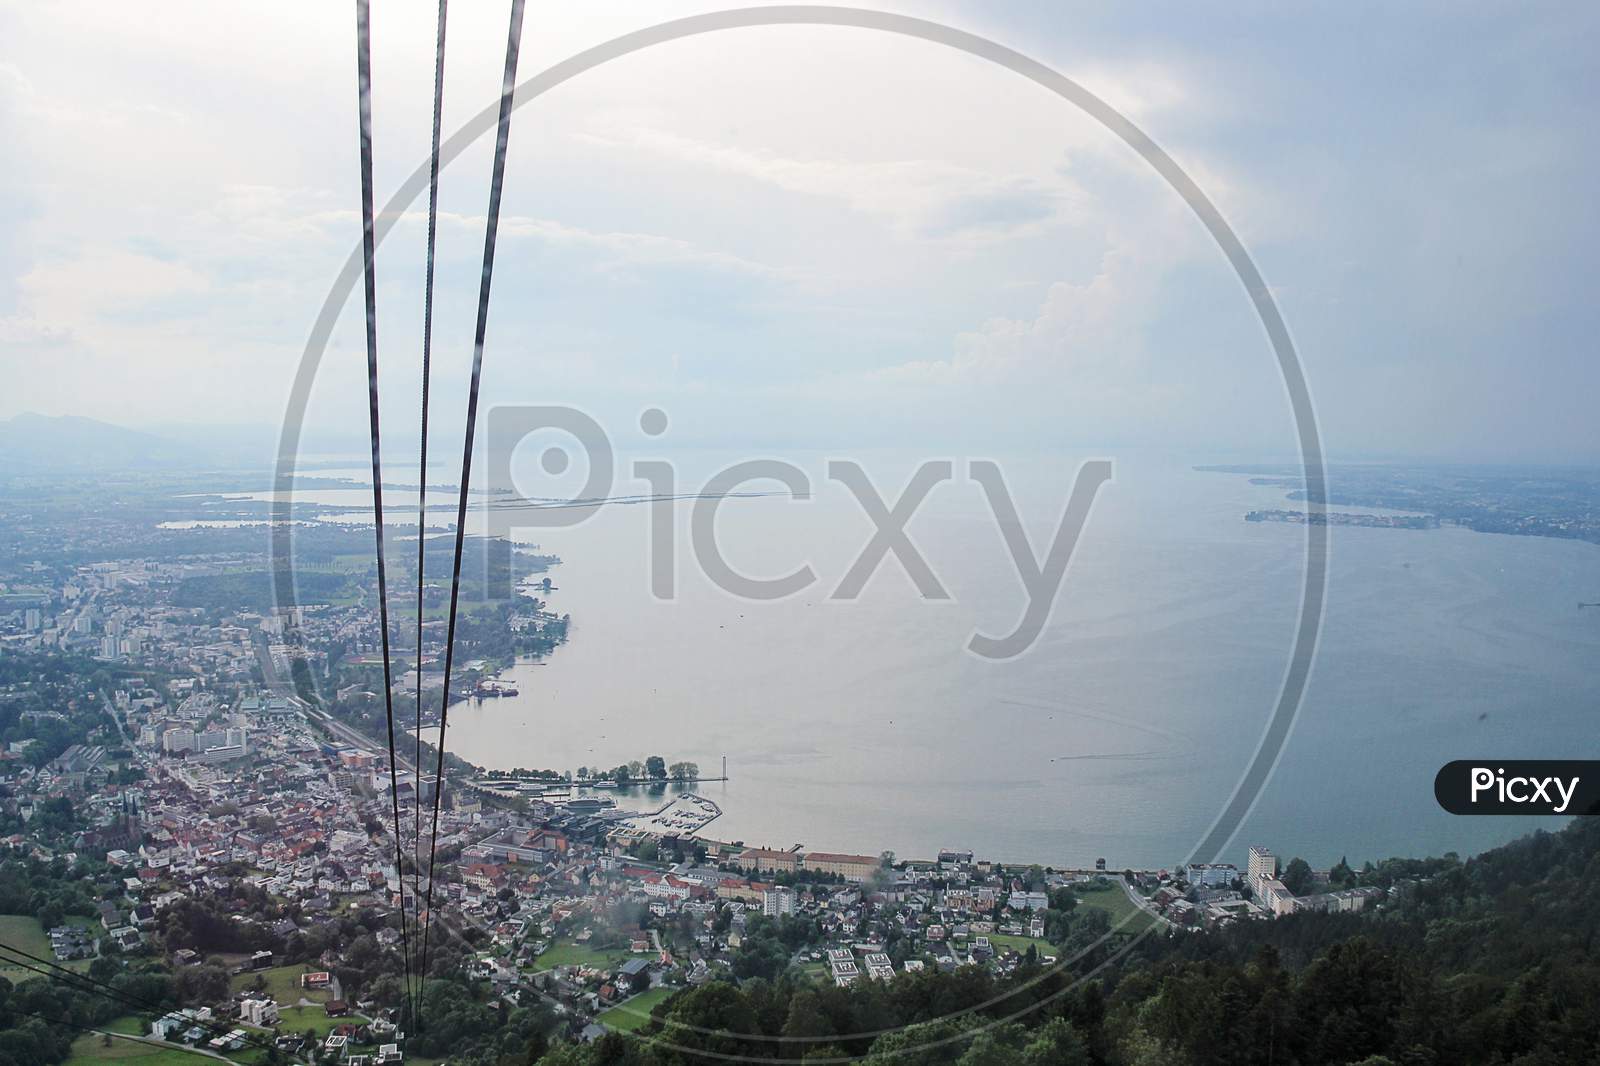 View From The Cable Car To The City And Lake Constance In Bregenz, Austria